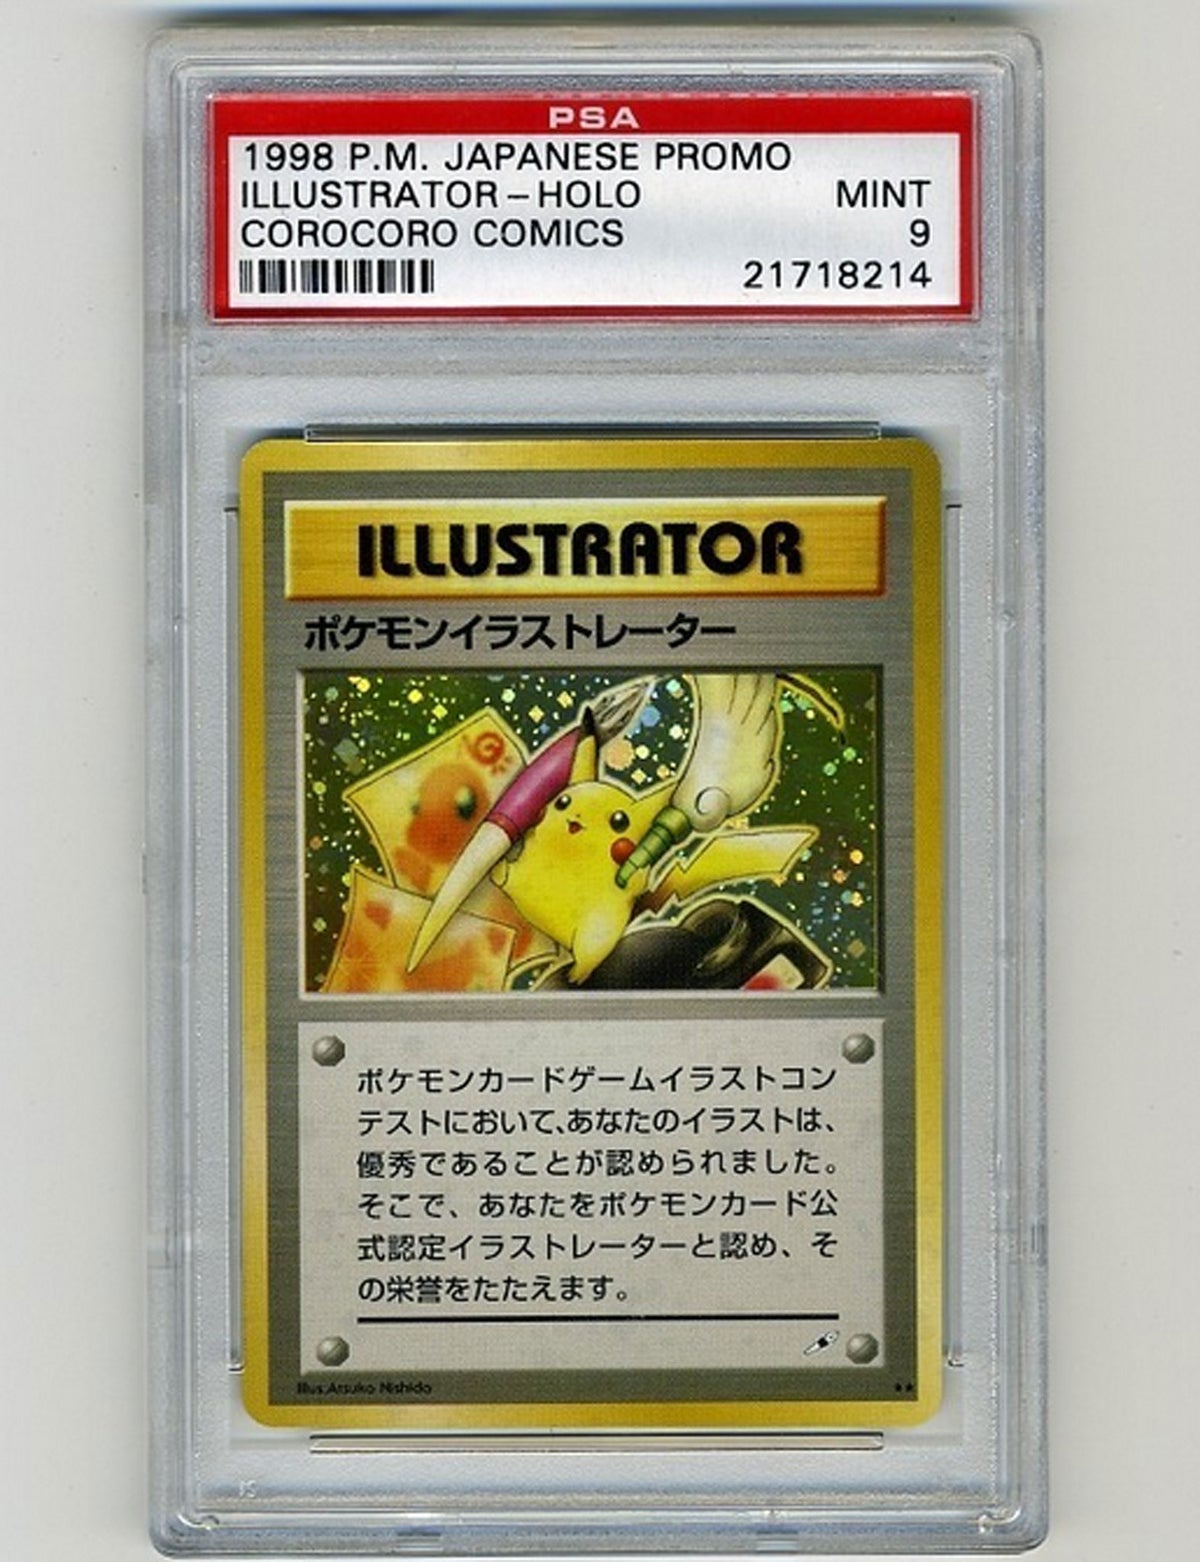 Holy Grail Of Pokemon Cards Selling For 100 000 On Ebay The Independent The Independent